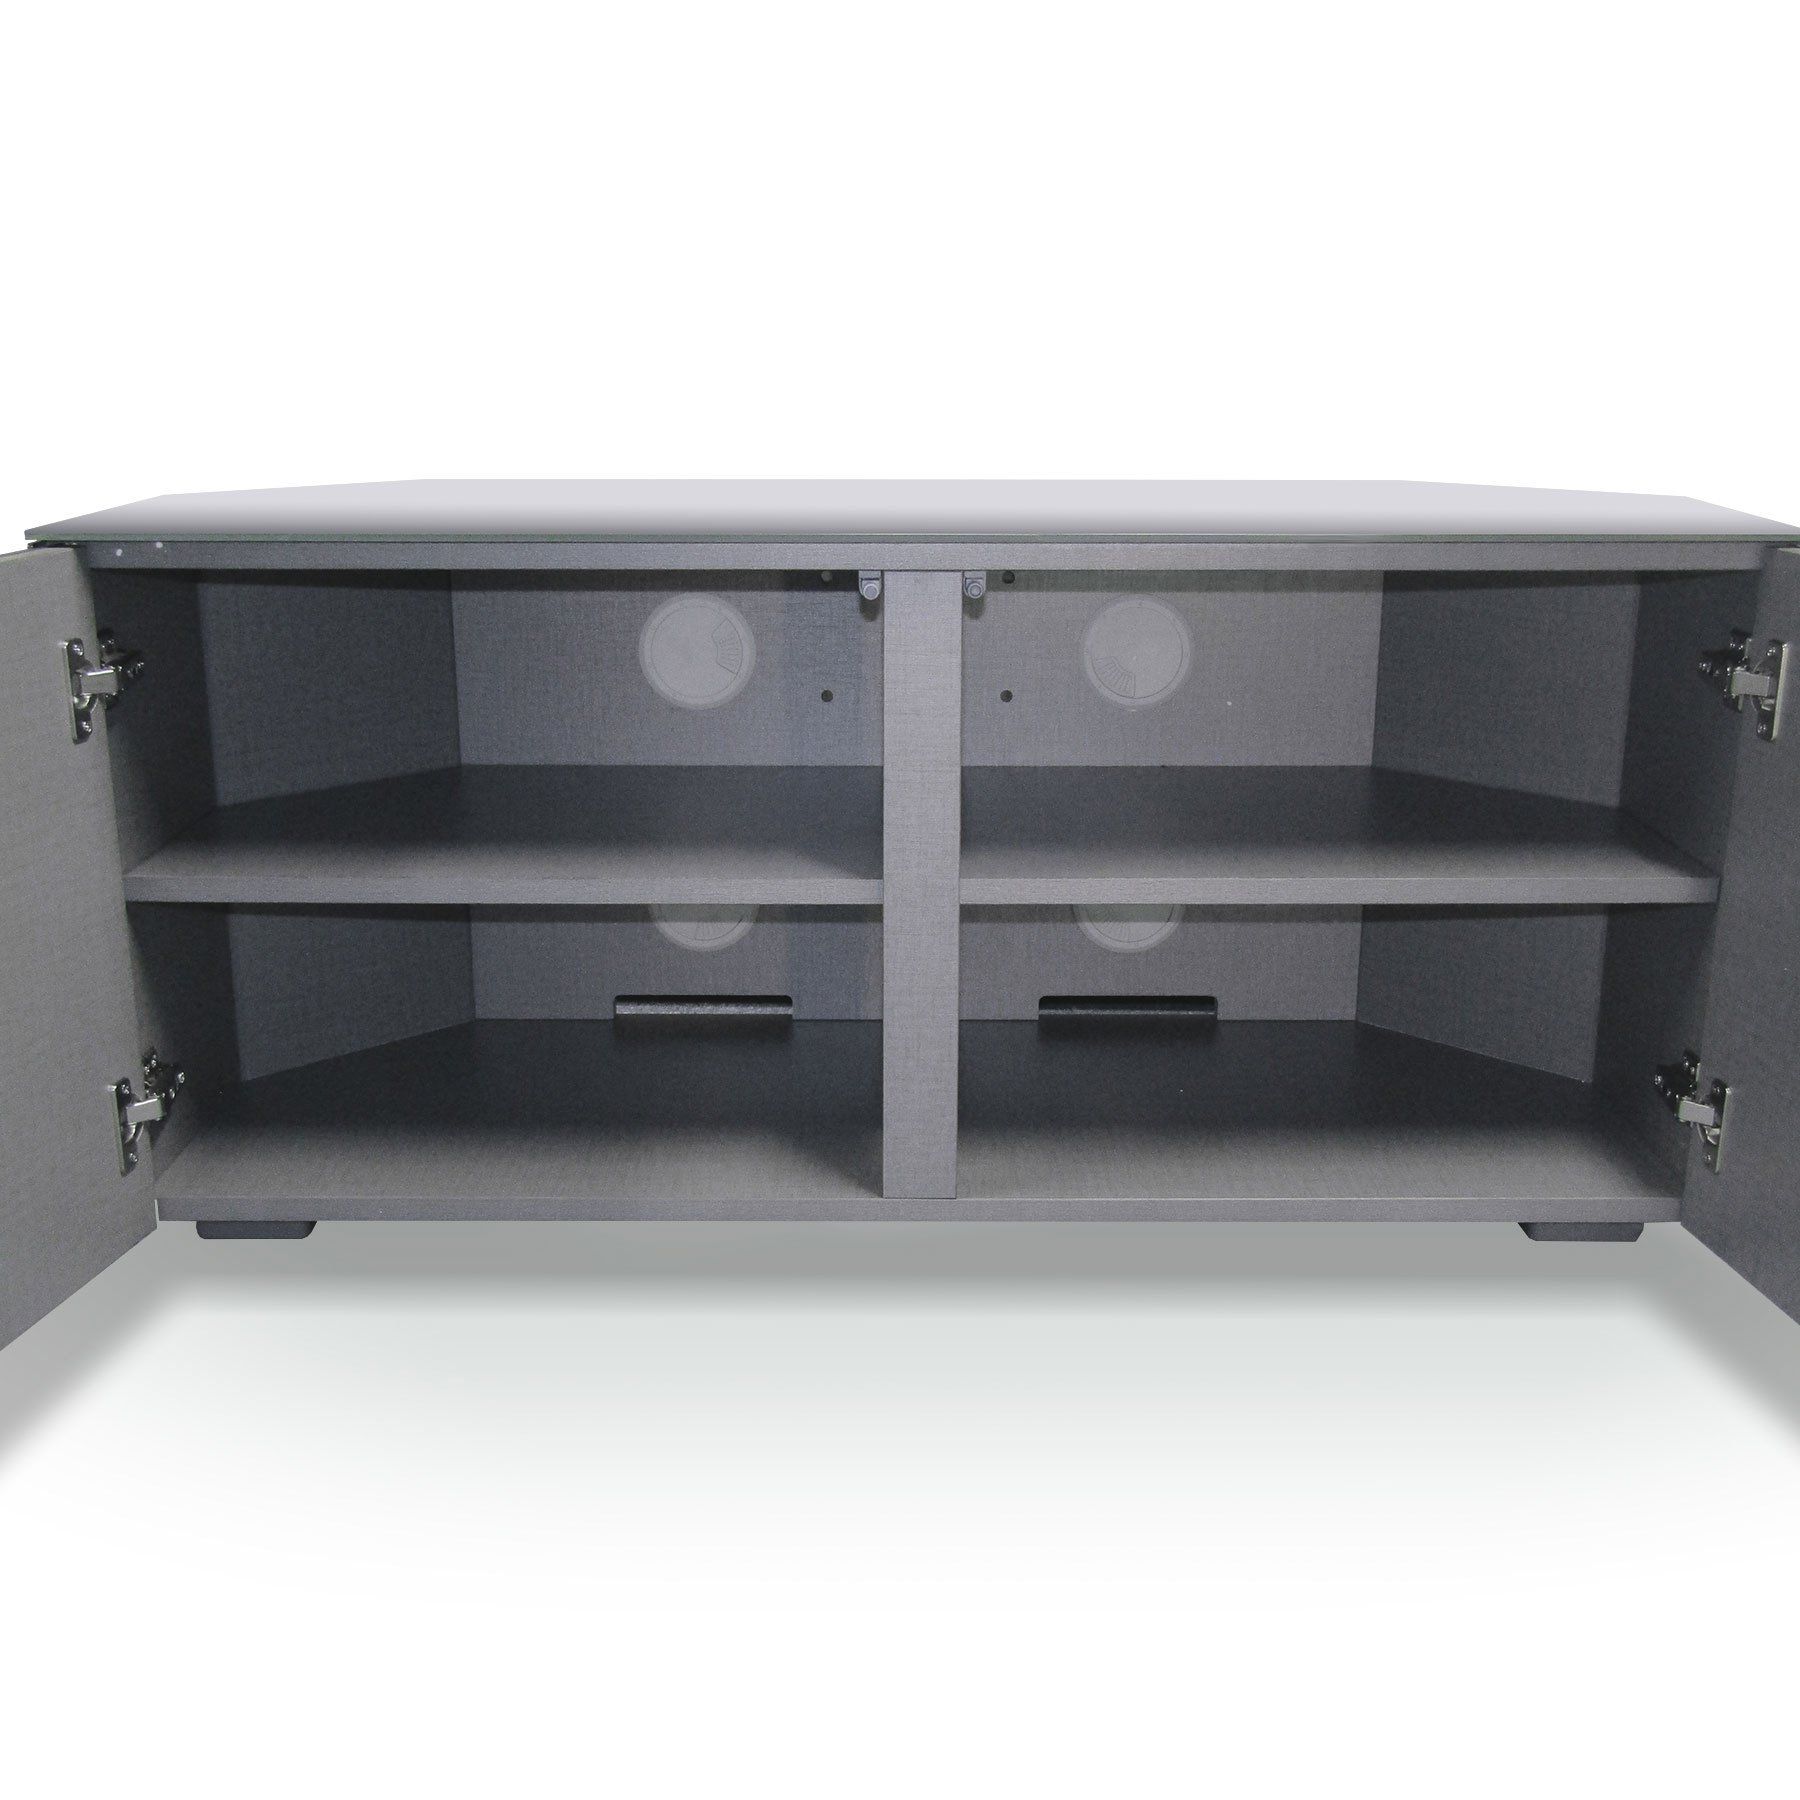 Invictus White High Gloss Corner Tv Stand For Up To 55" Tvs Pertaining To White High Gloss Tv Stands (View 6 of 15)